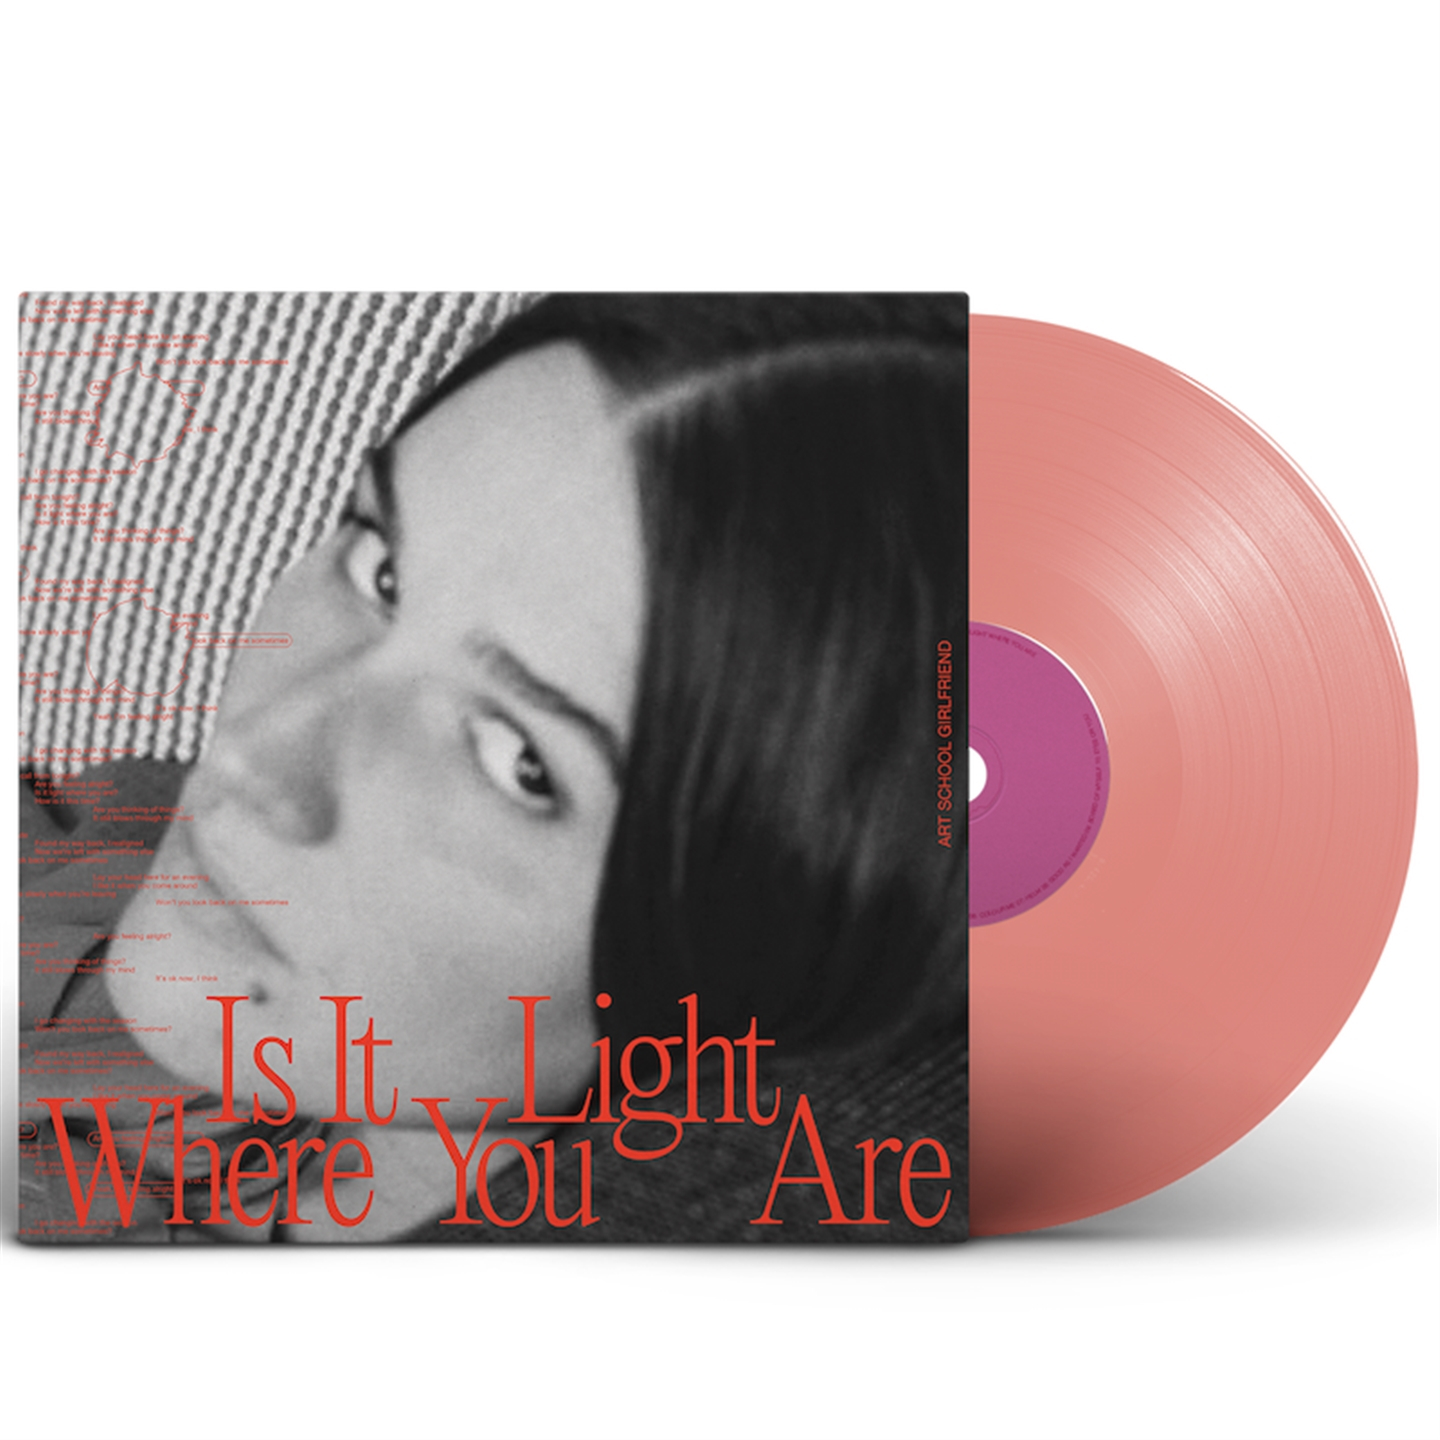 IS IT LIGHT WHERE YOU ARE - LP 180 GR. COLORED TRANS ORANGE VINYL INDIE EXCLUSI